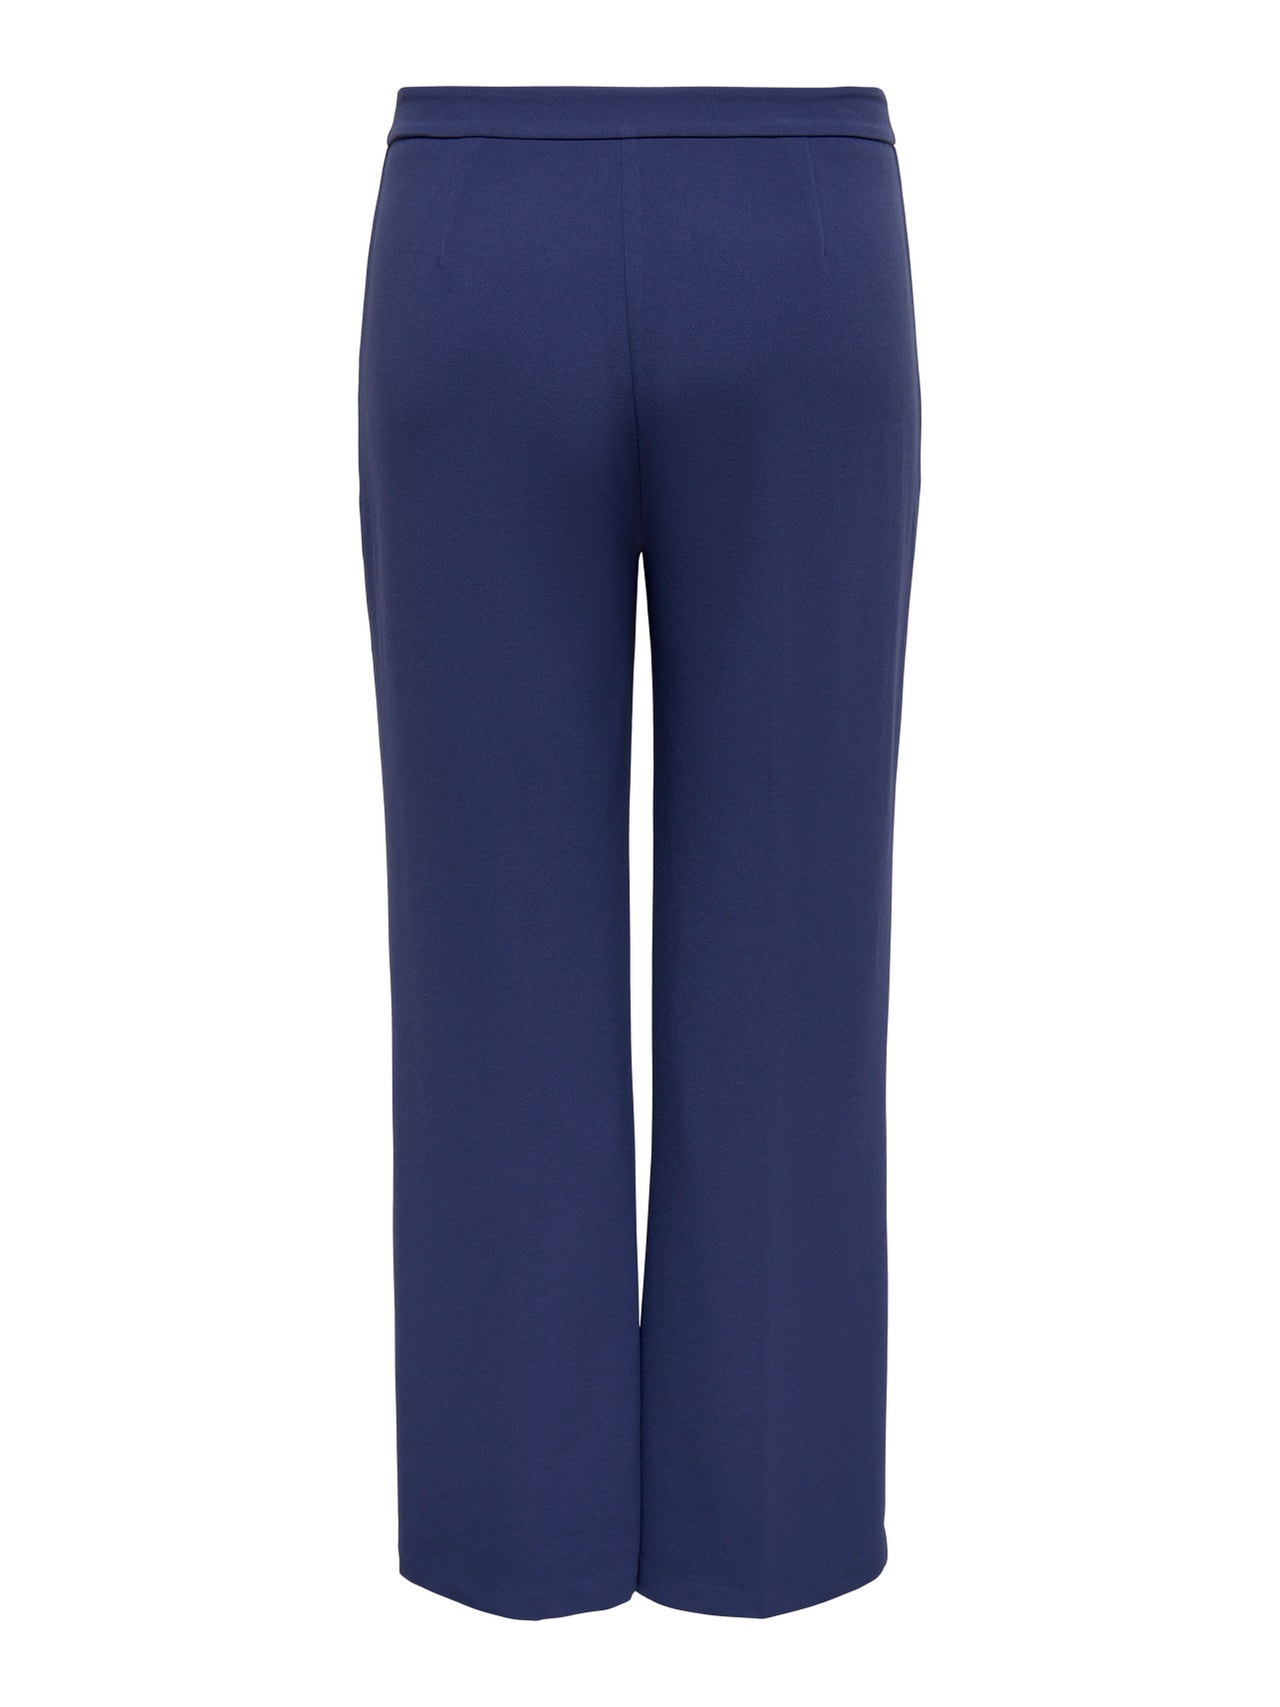 ONLY Pantalons Straight Fit -Patriot Blue - 15267304